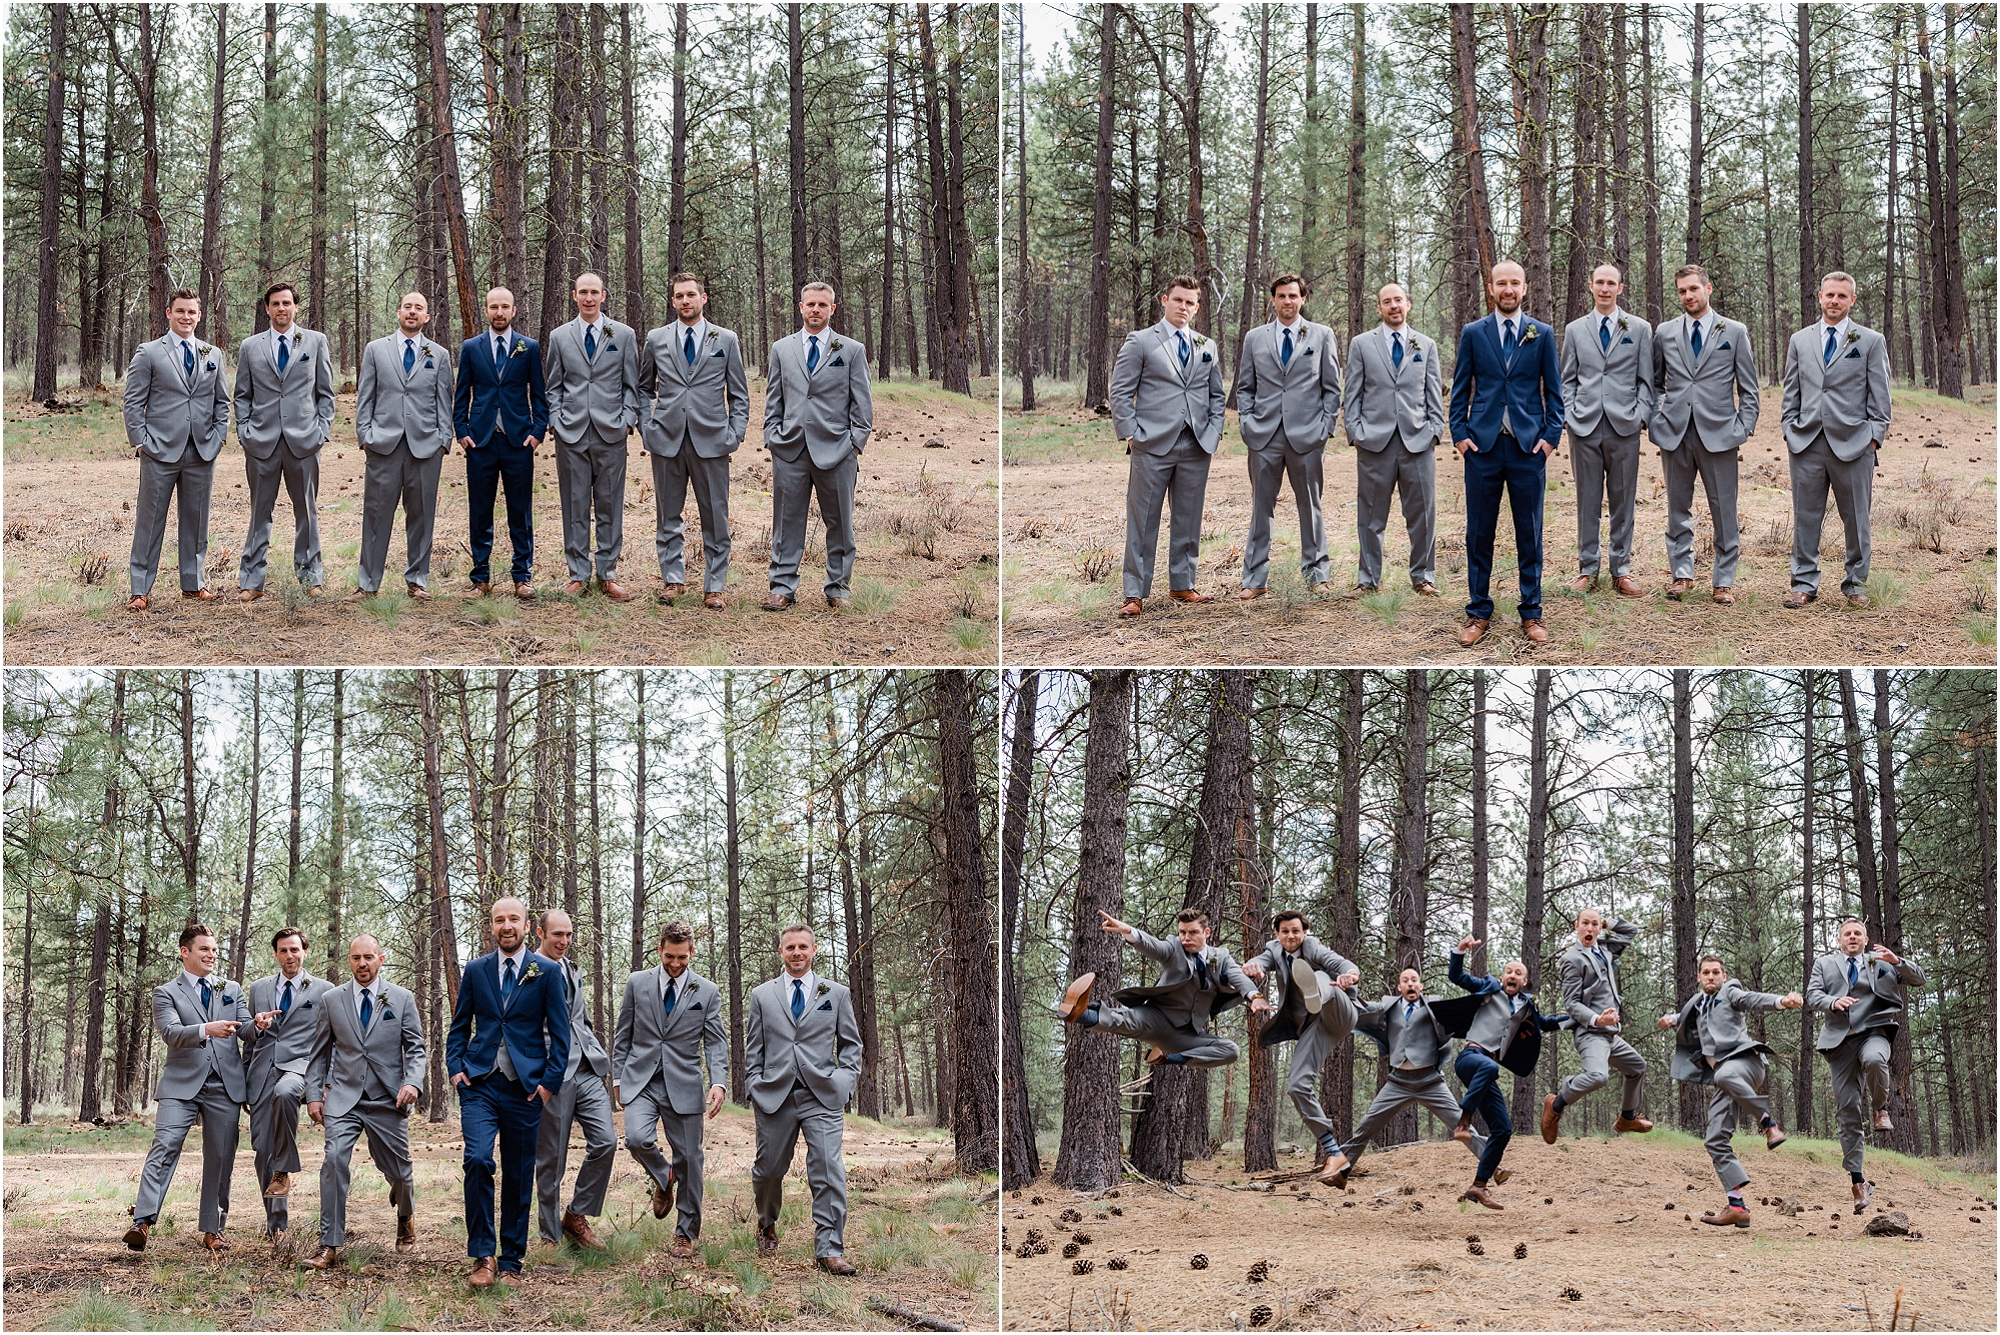 The groomsmen all wore gray suits with navy ties to accompany the groom's navy suite at this outdoor wedding in Bend, OR. | Erica Swantek Photography